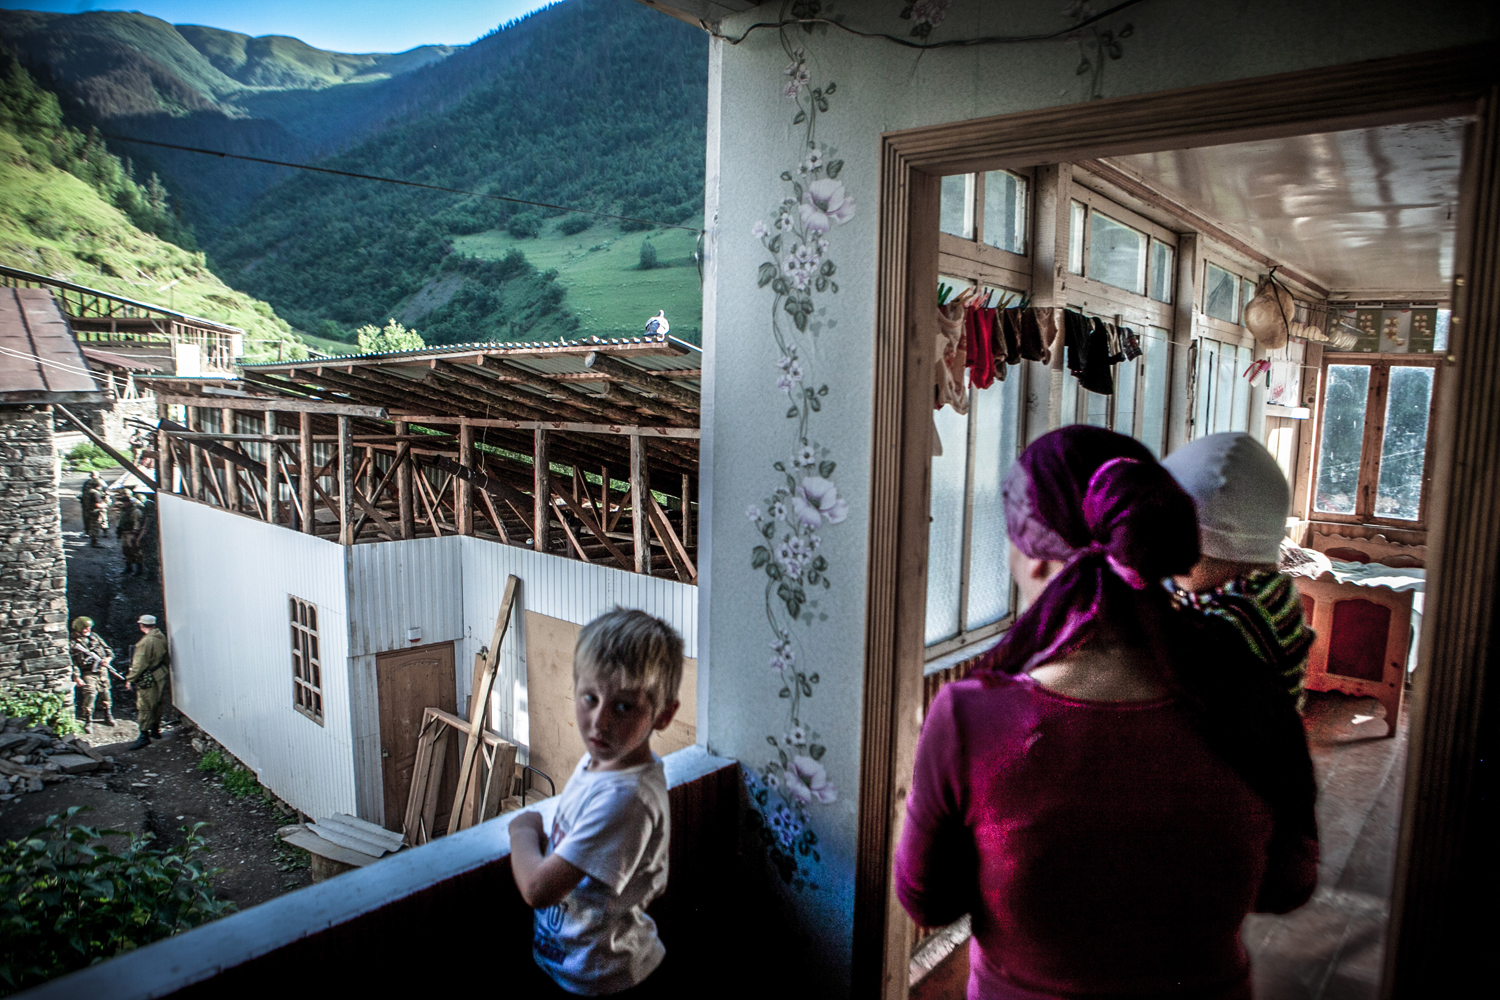 Regular house check by military forces in the mountain village. Dagestan has almost a half of its territory locked down under a special security regime, known as the CTO - abbreviation for “counter-terrorist operation”. It means: martial law, curfews and random searches enforced by the Russian military and ongoing talks about the new bloody war in the North Caucasus.